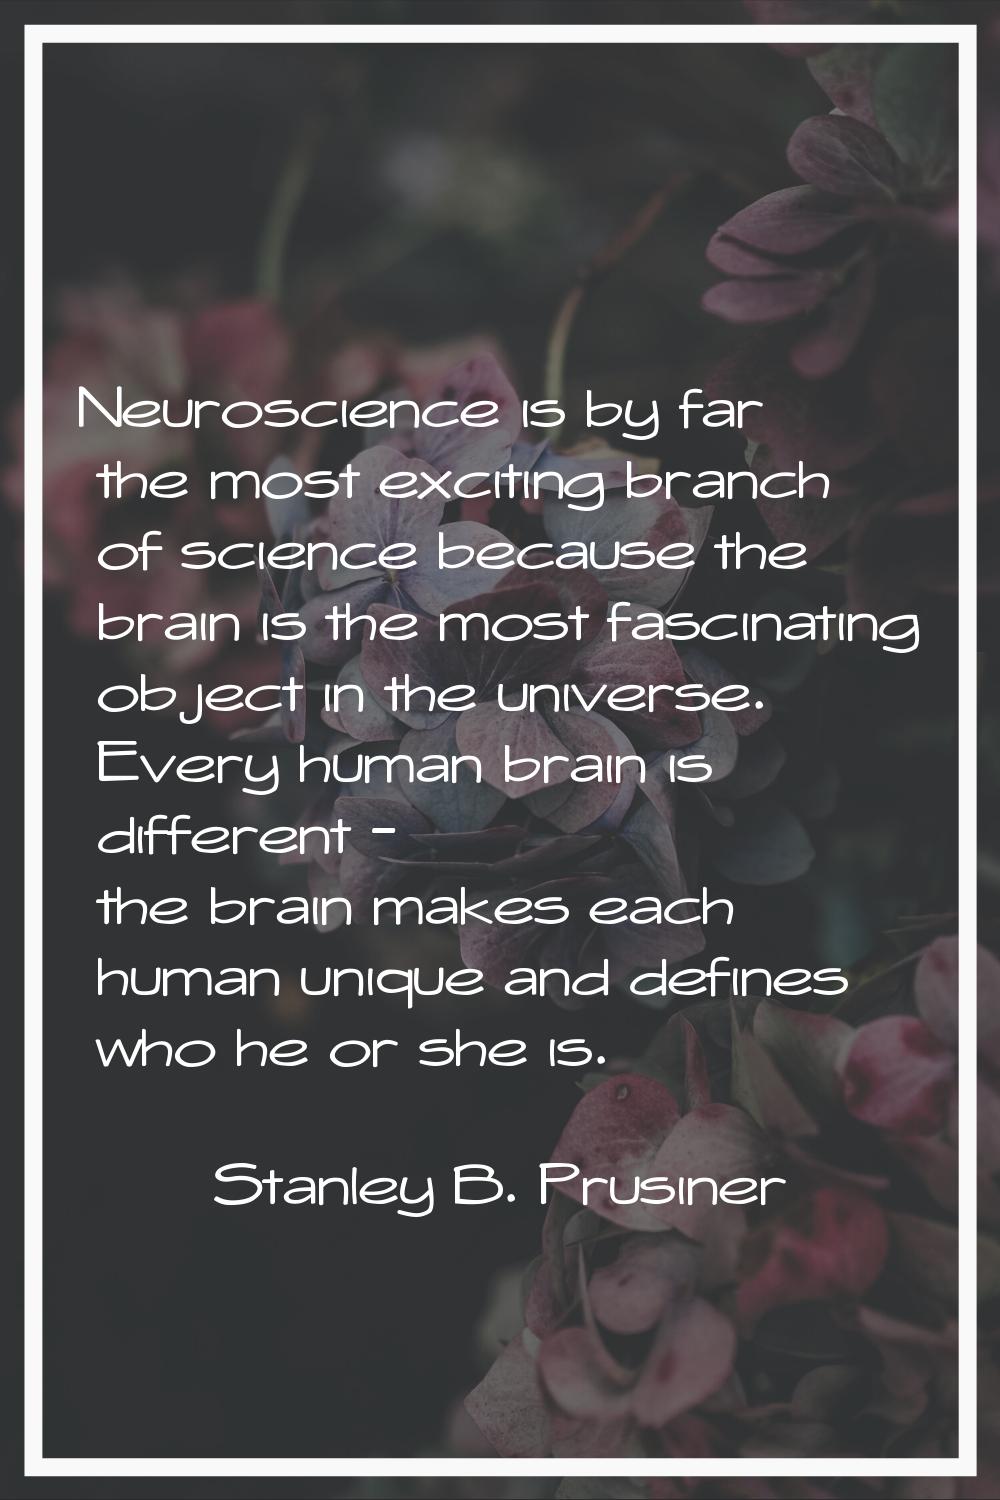 Neuroscience is by far the most exciting branch of science because the brain is the most fascinatin